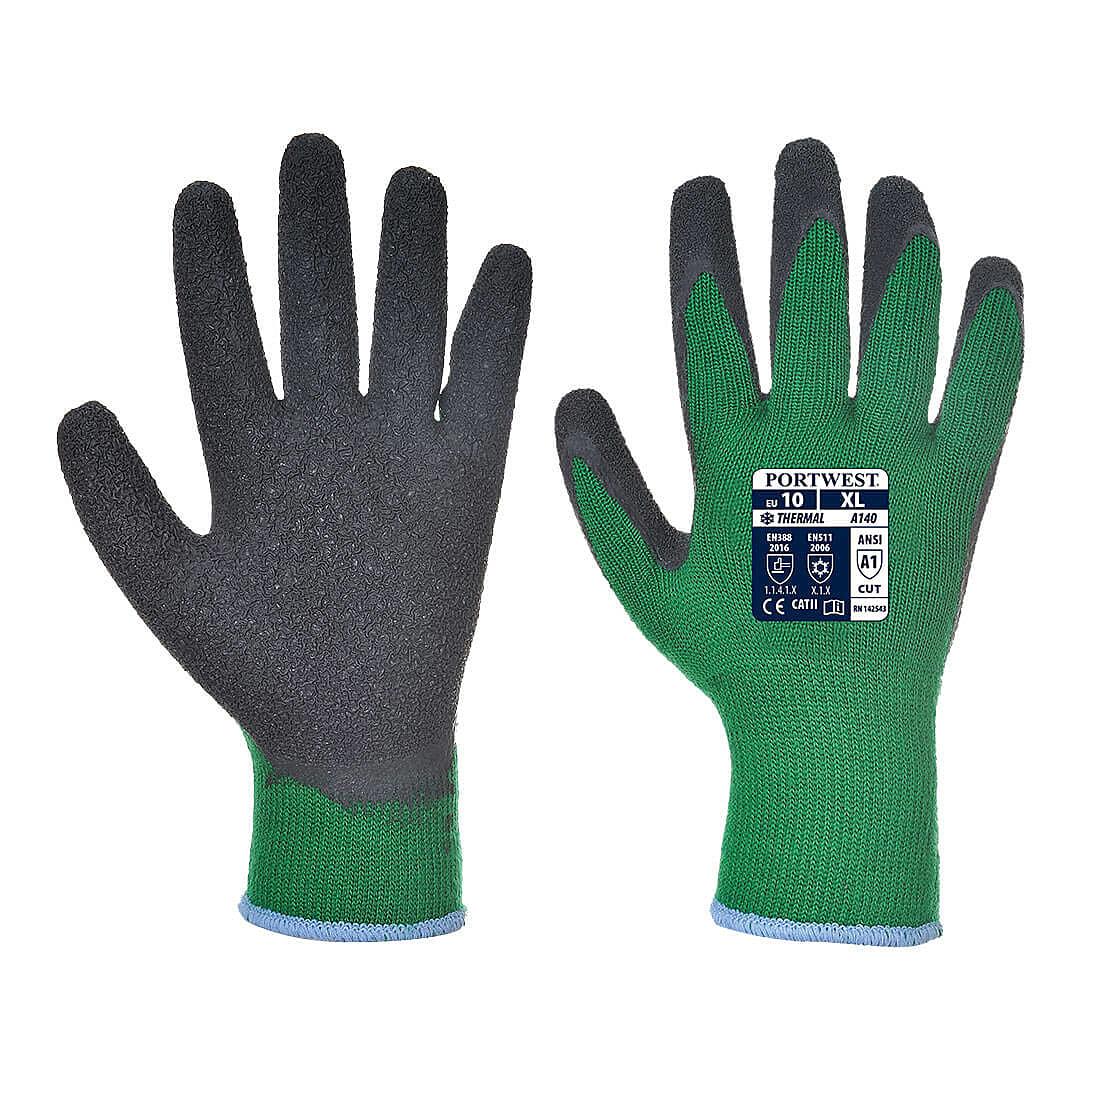 Portwest Thermal Grip Gloves - Latex in Green / Black (Product Code: A140)